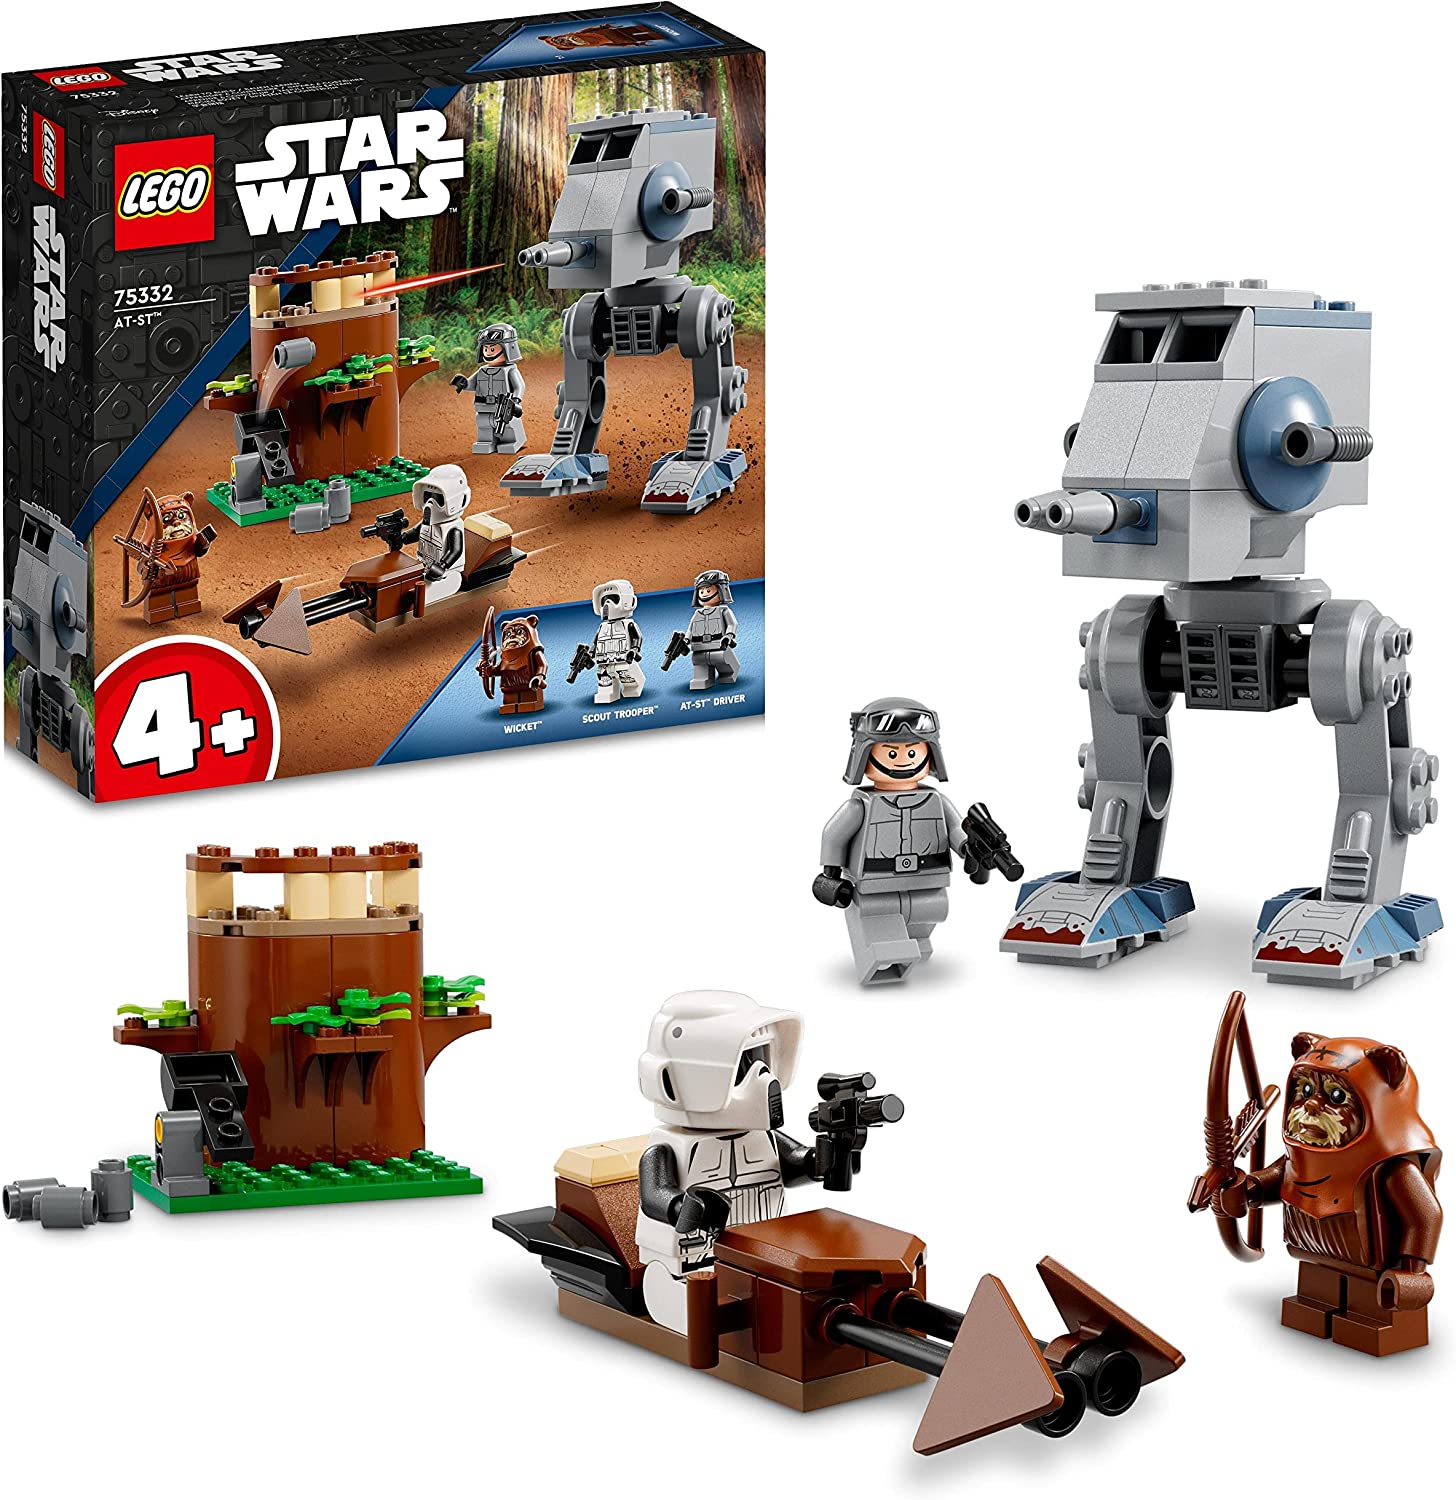 LEGO 75332 Star Wars at-ST Construction Toy for Preschool Children from 4 Years with Ewok Wicket and Scout Trooper Mini Figures and Starter Building Element Set 2022